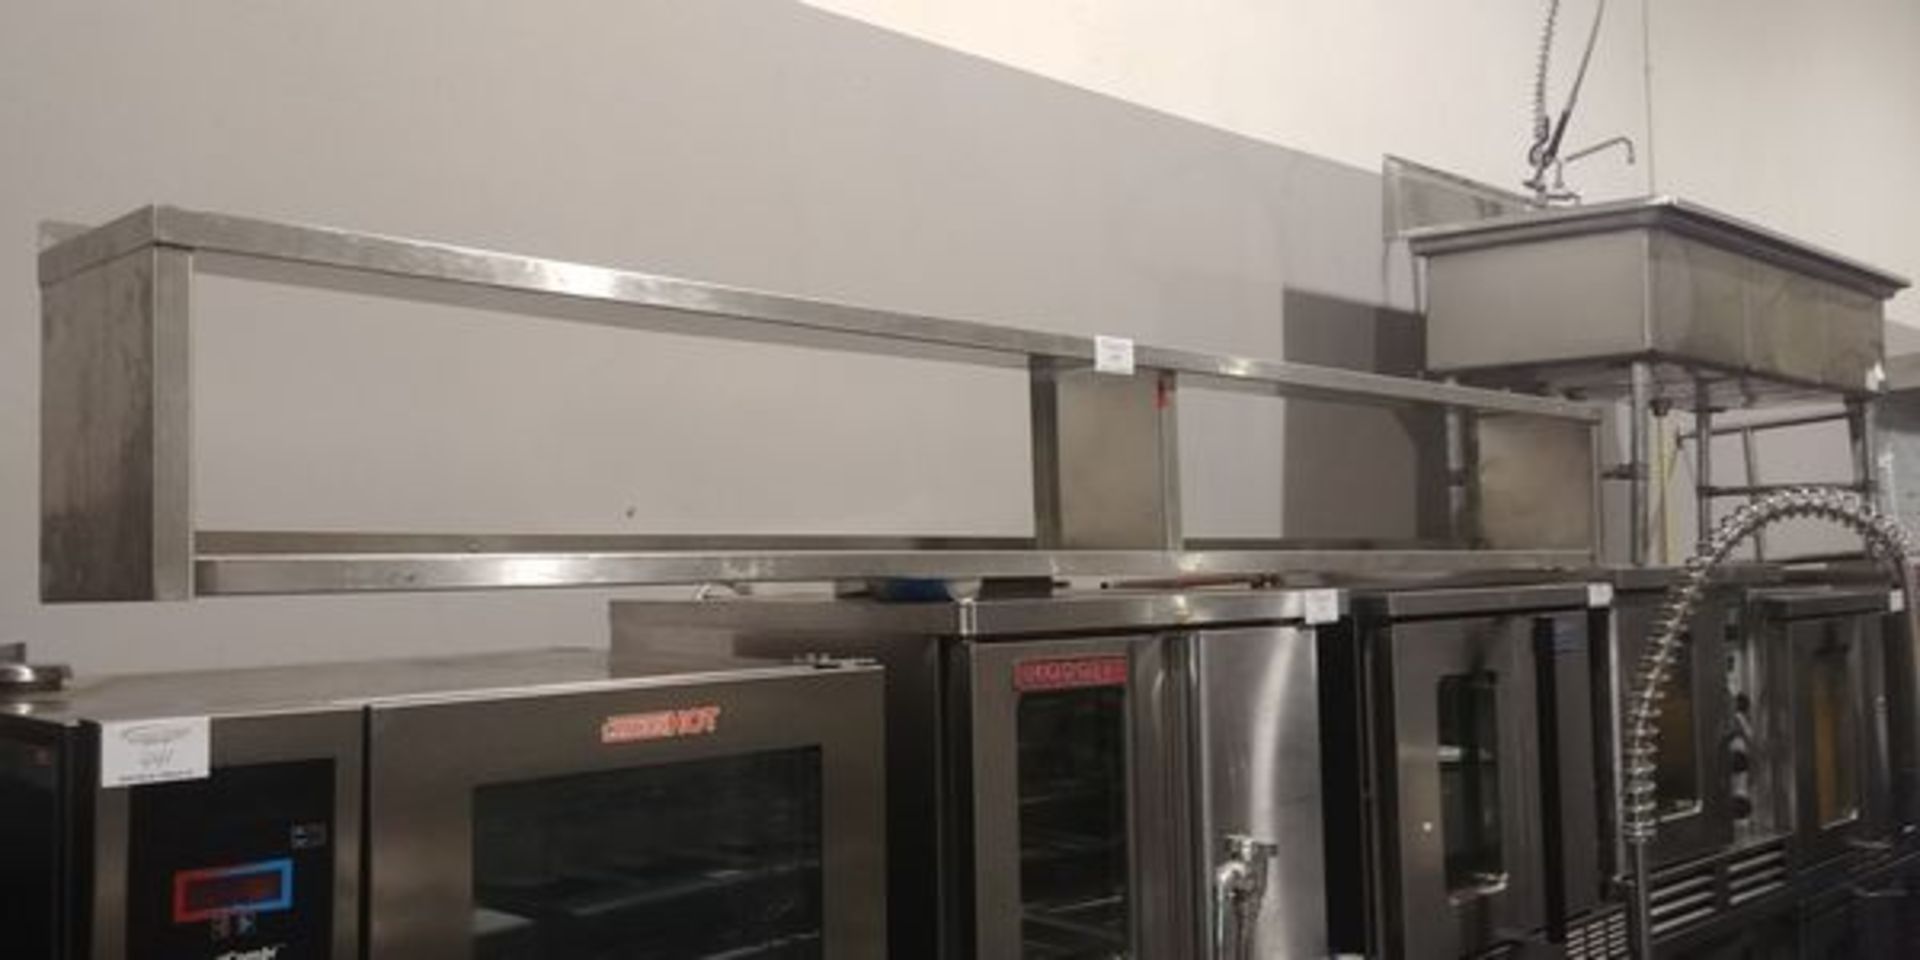 Approx. 11ft - 2 Tier Stainless Steel Wall Shelf